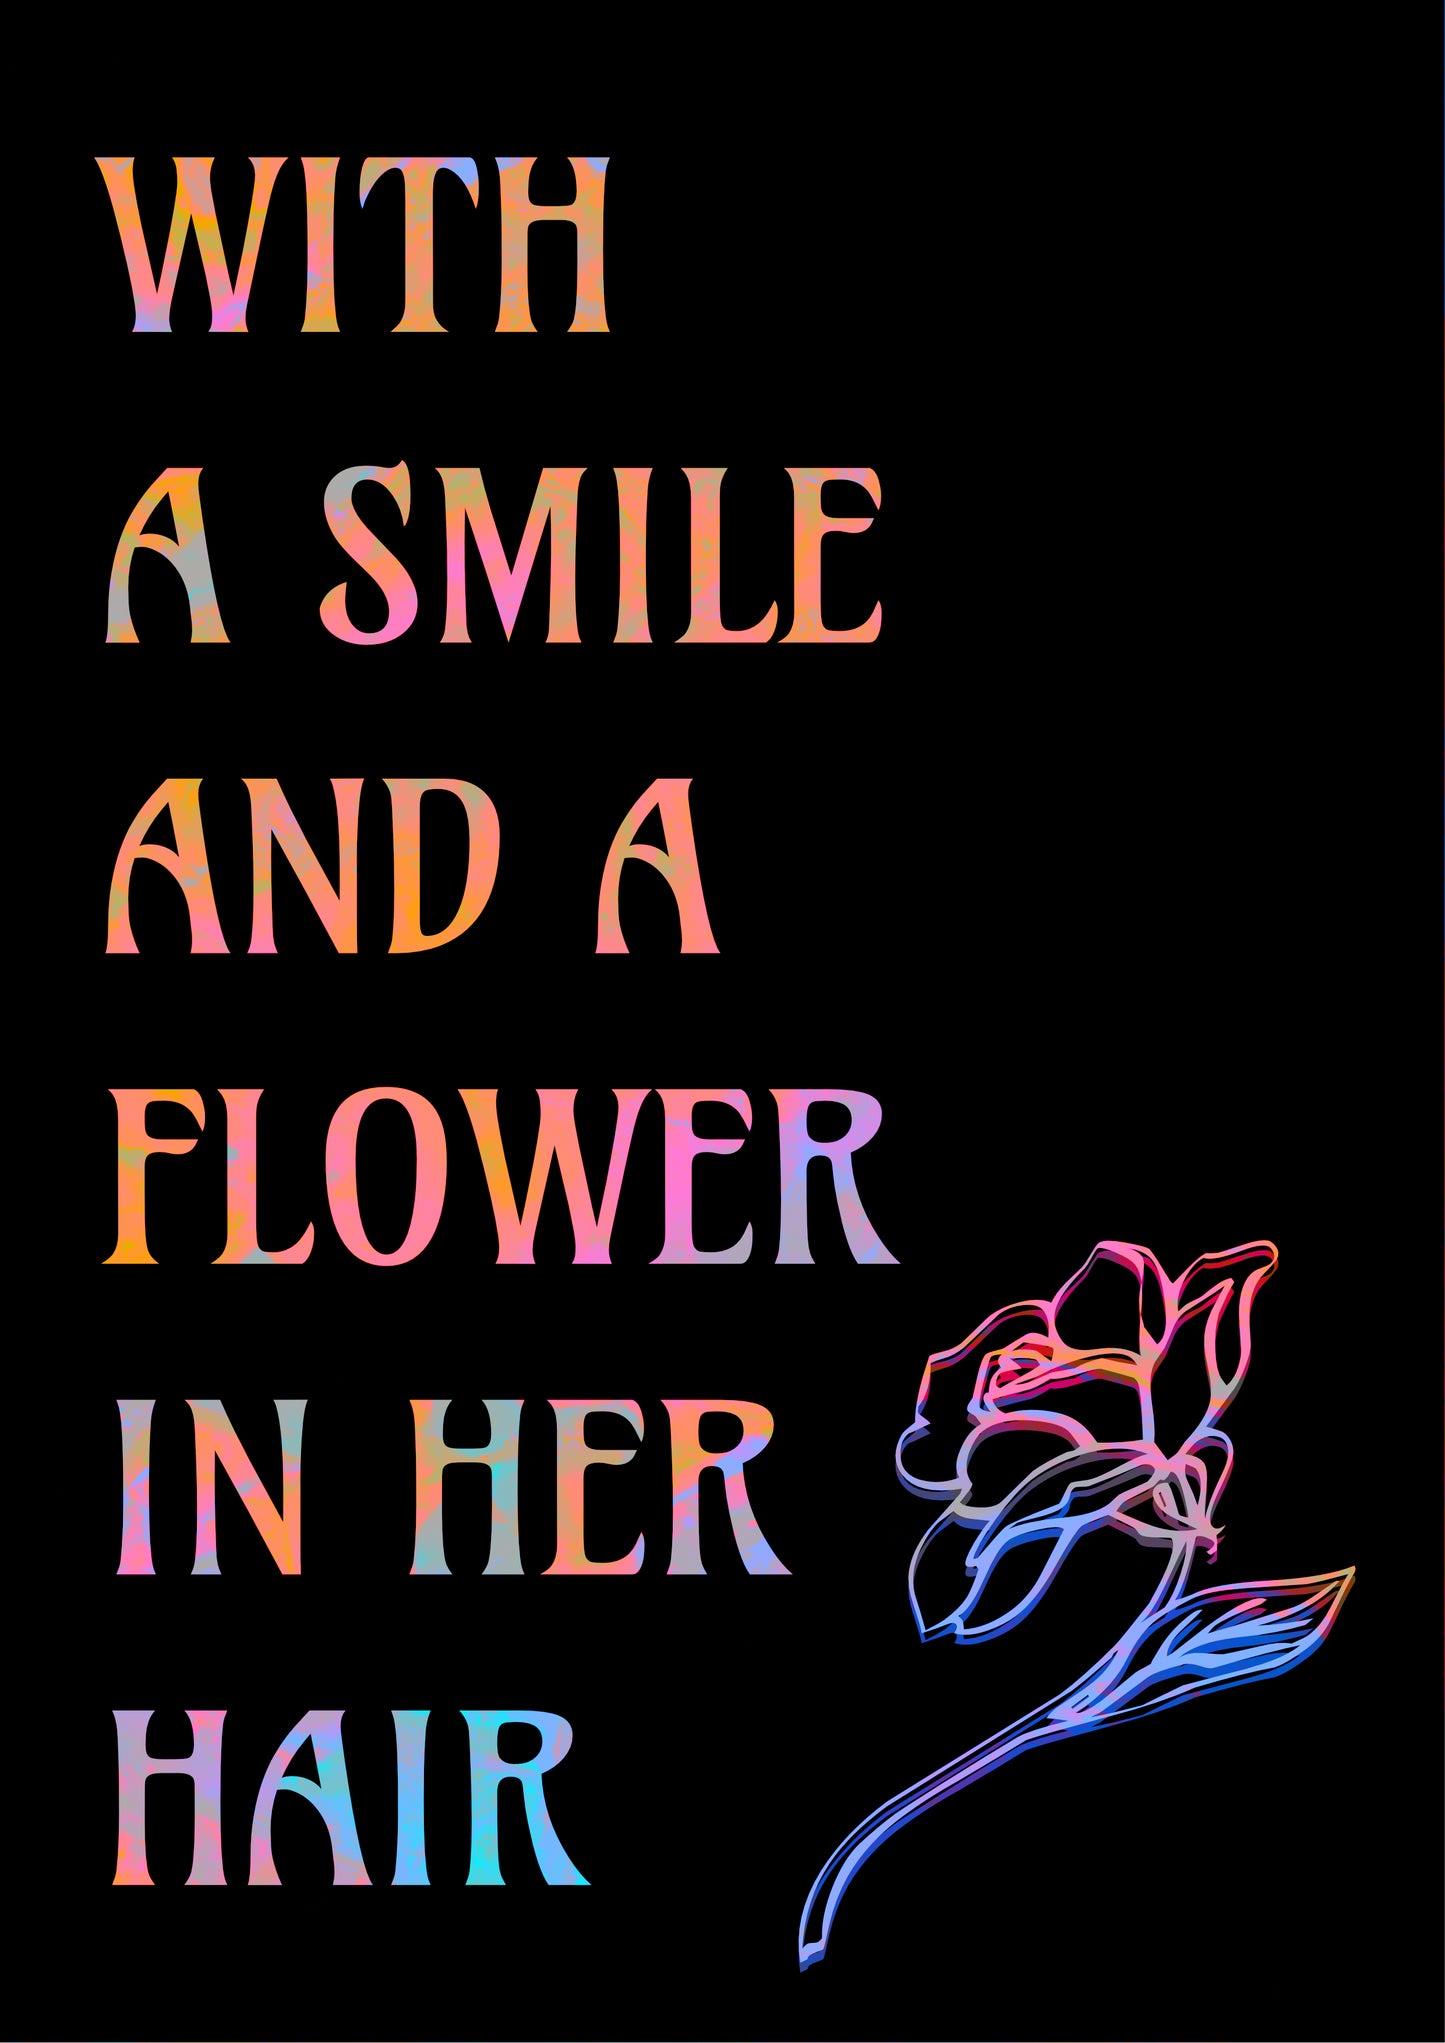 WITH A SMILE AND A FLOWER IN HER HAIR